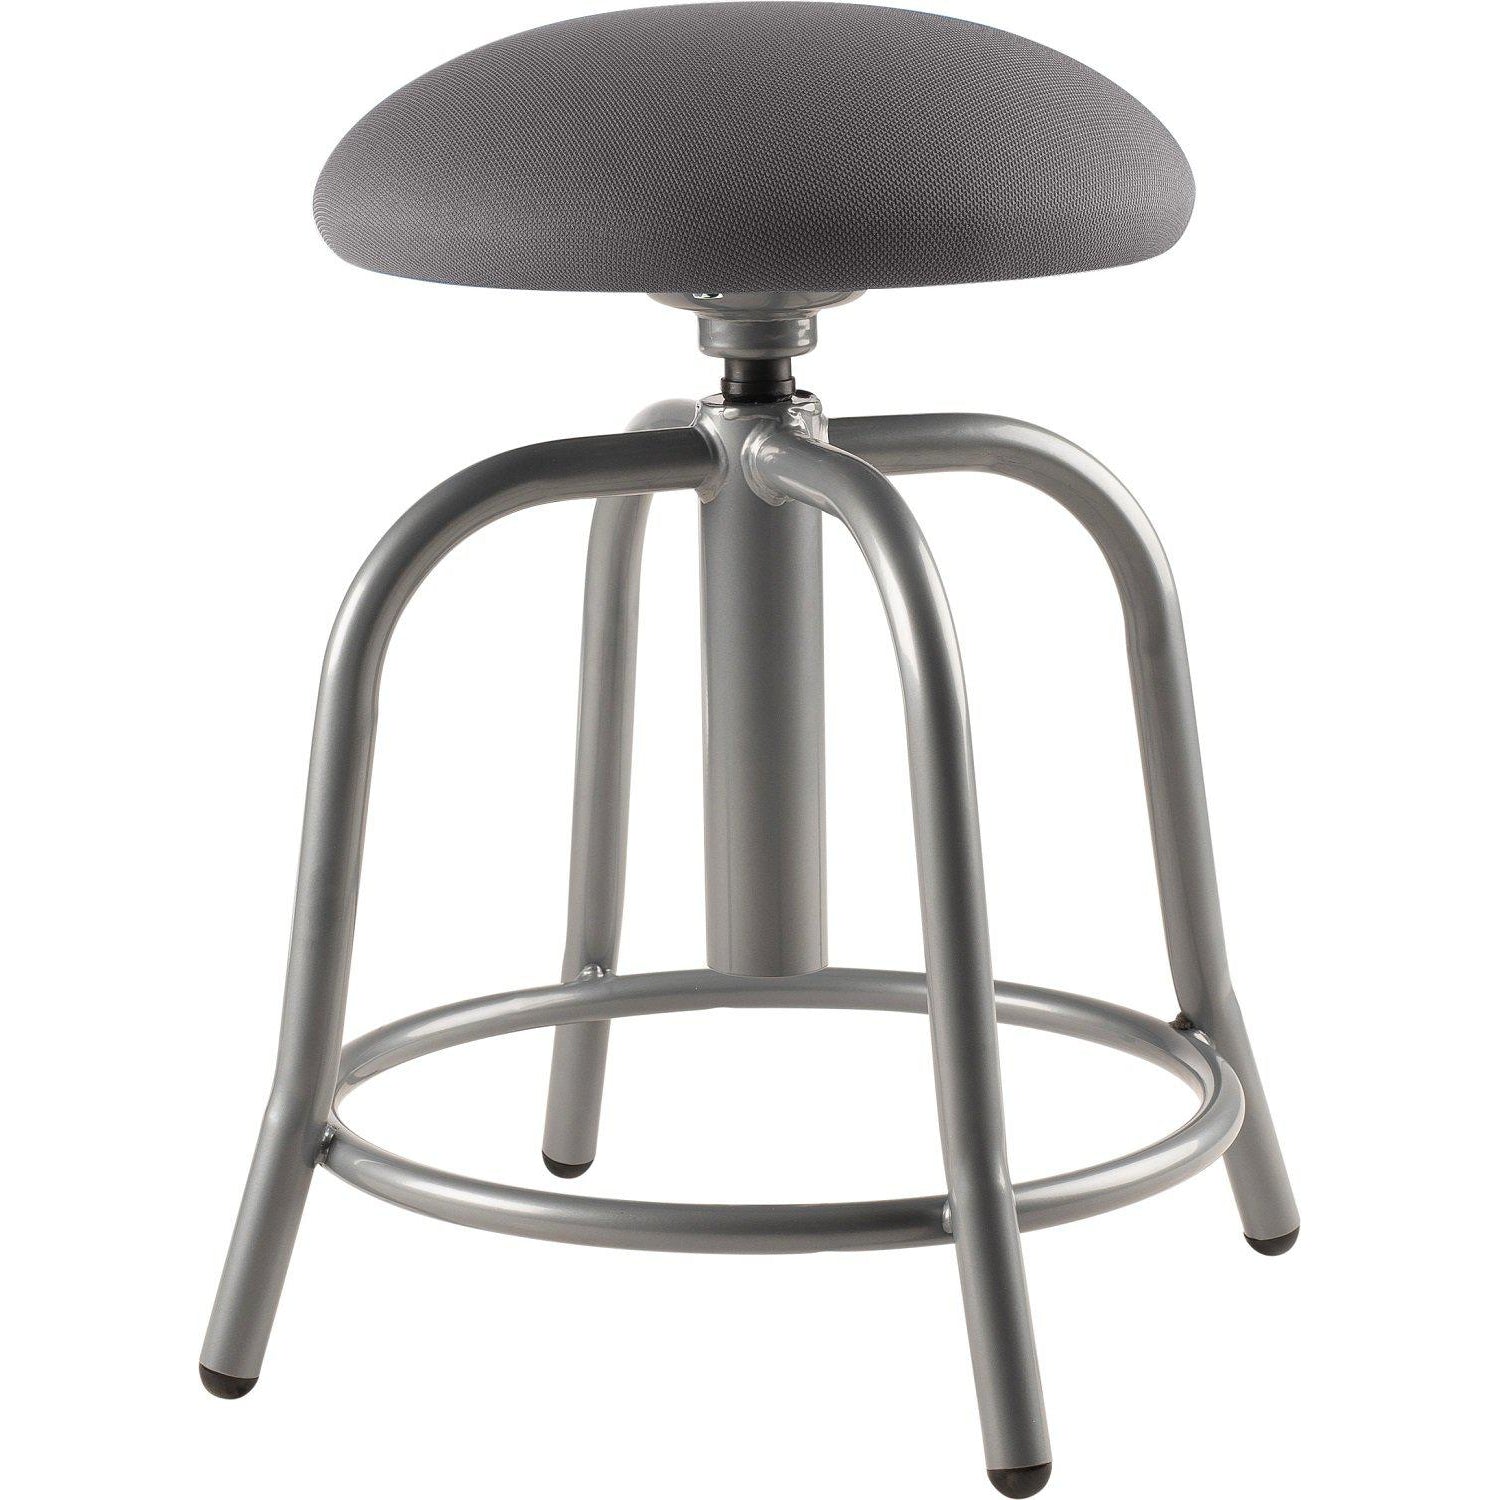 18"-25" Height Adjustable Contemporary Designer Stool with 3" Fabric Padded Charcoal Seat, Metallic Grey Frame